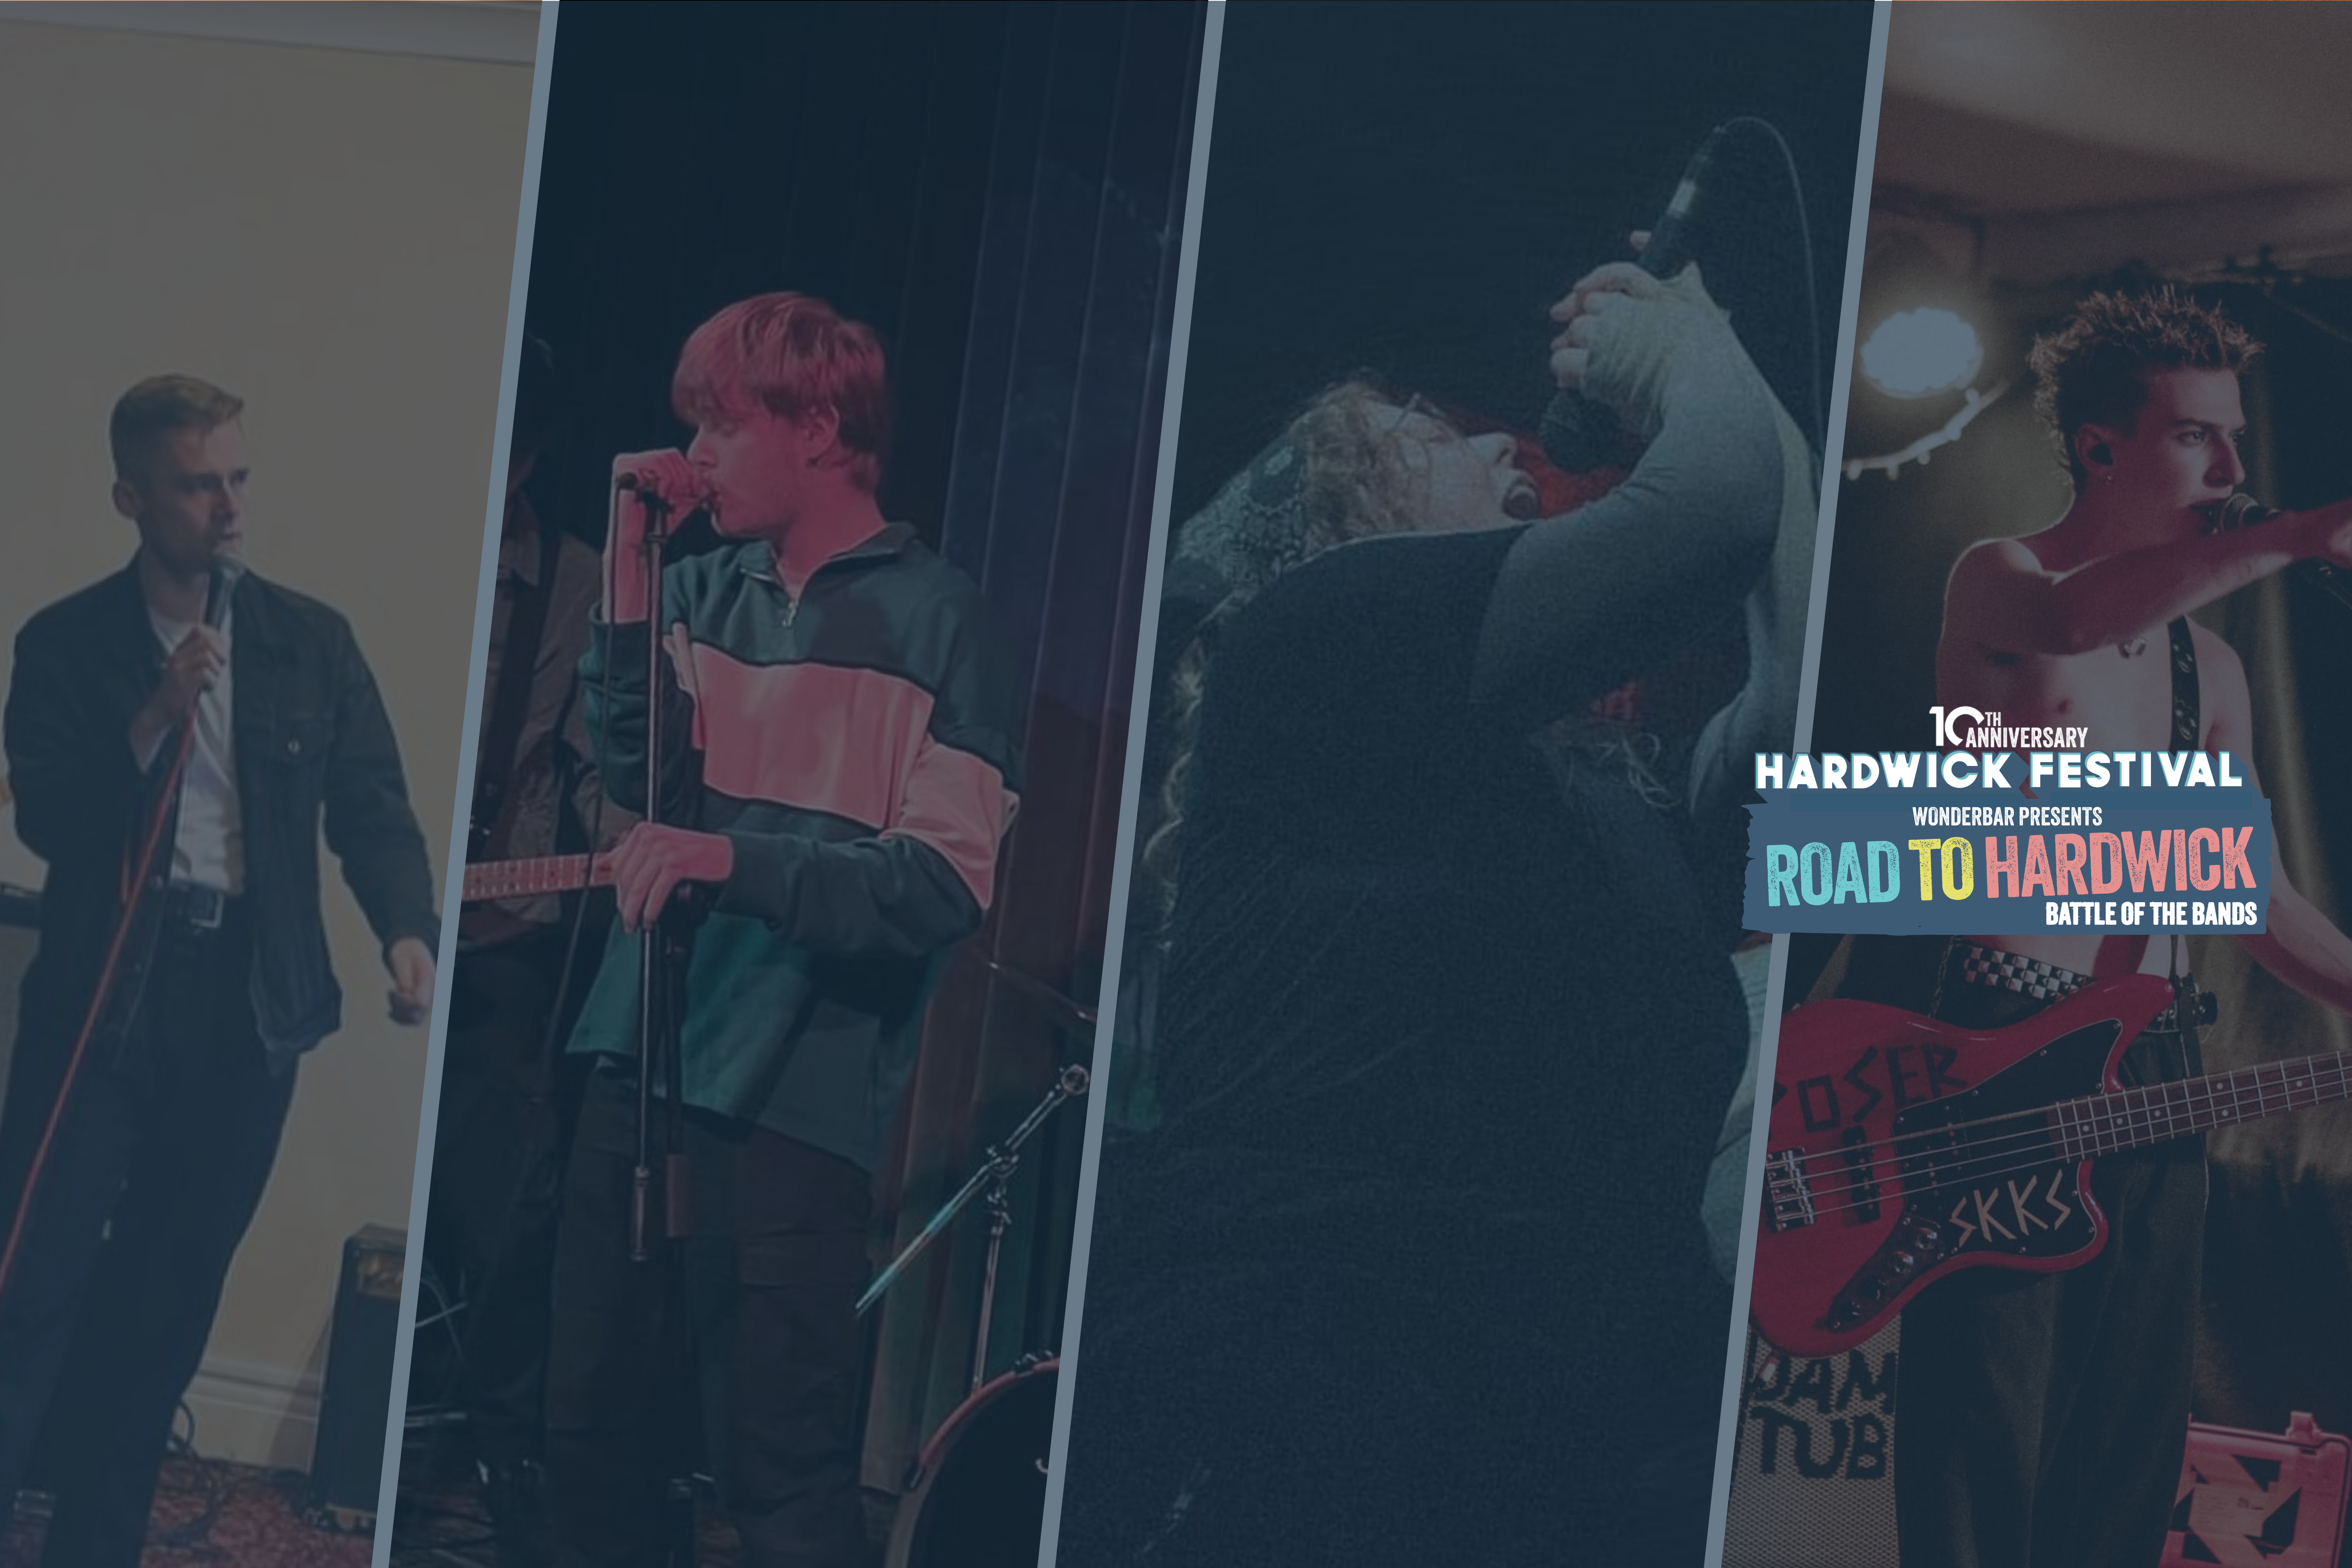 The Final lineup at The Road To Hardwick – Battle of The Bands The Heats!